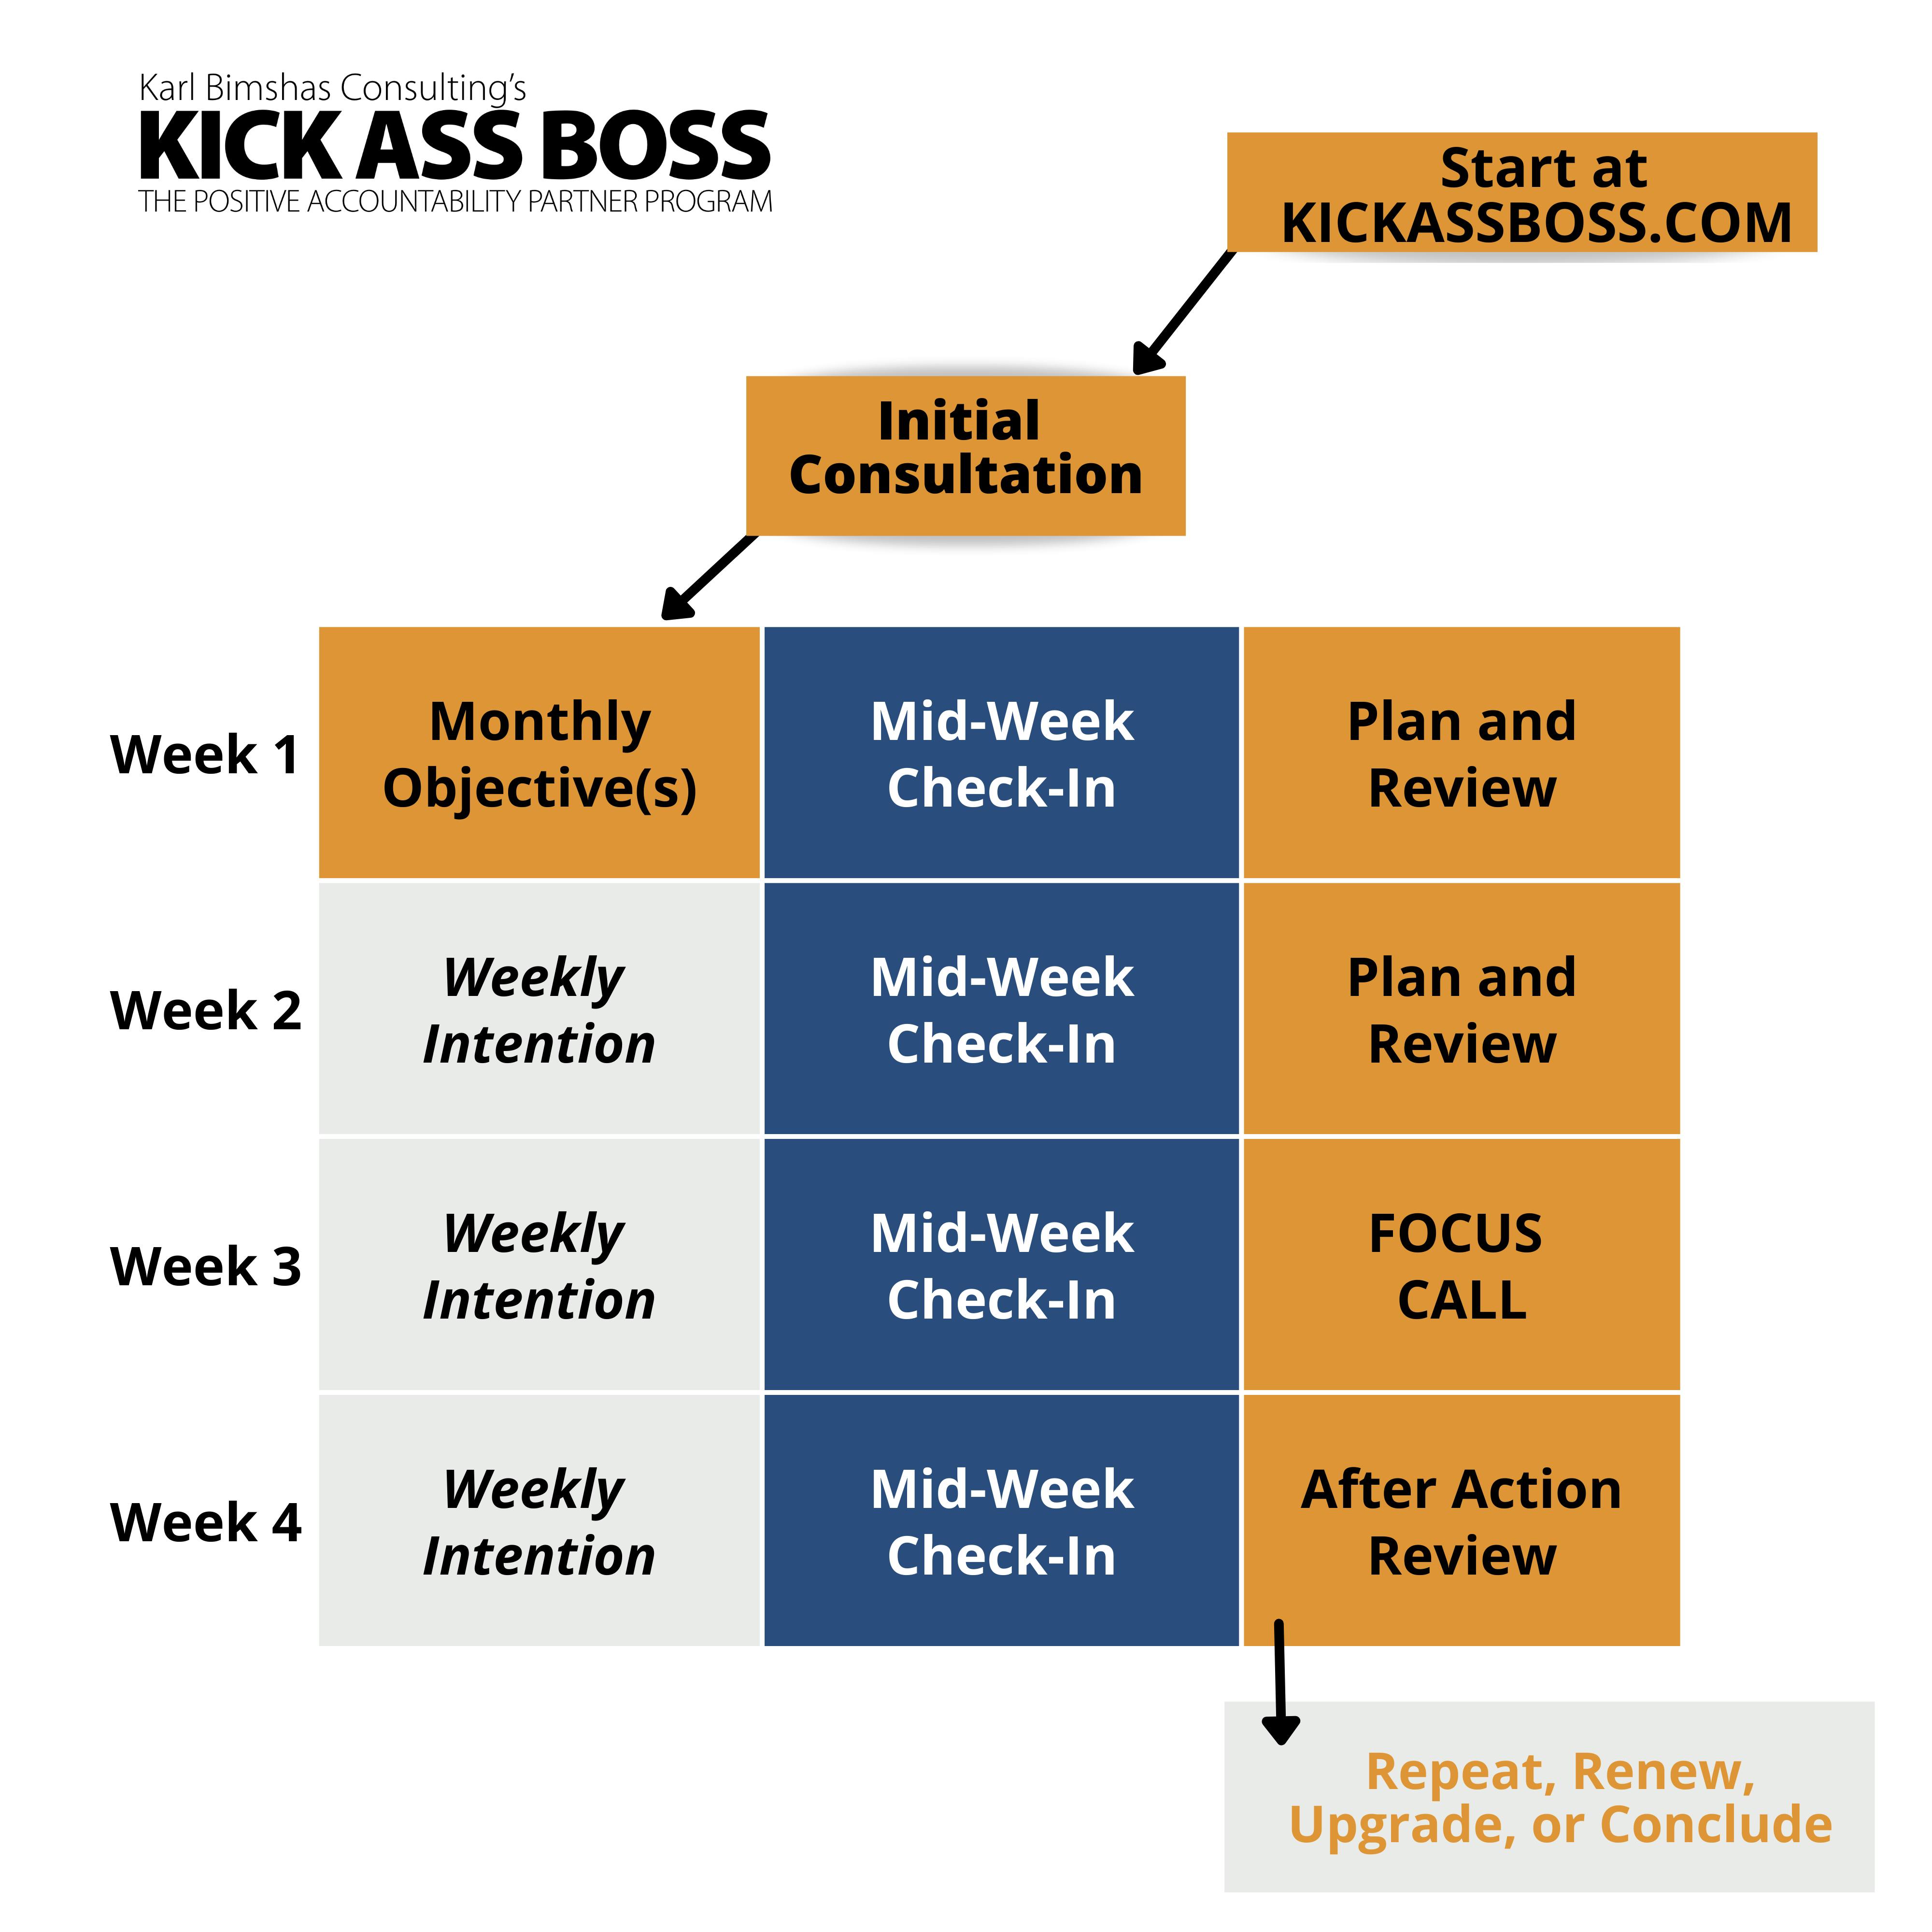 Example of what a Kick Ass Boss Accountability Partner Agreement with Karl Bimshas Consulting can look like